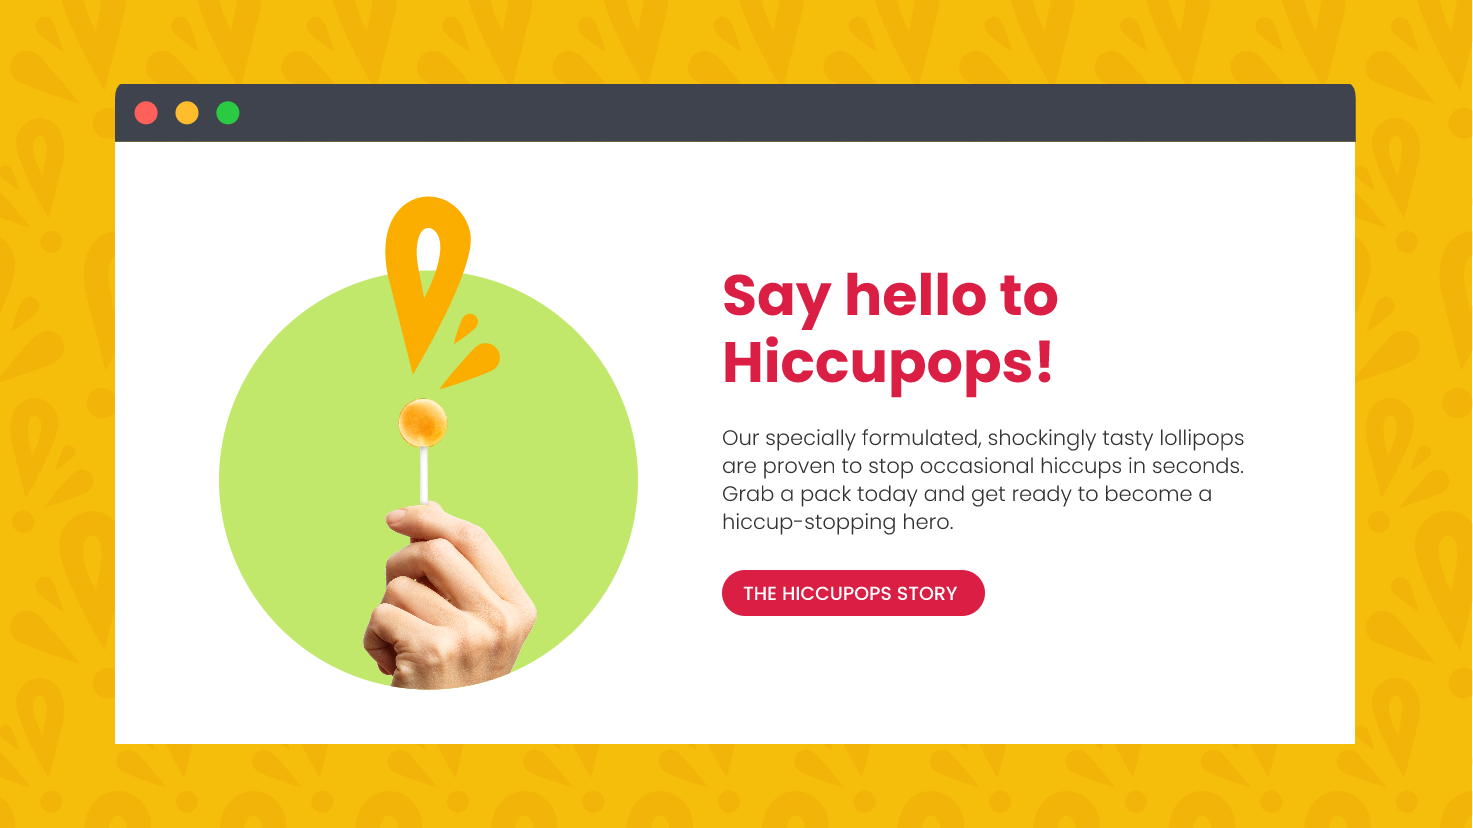 A screencapture of a webpage we developed for Hiccupops.